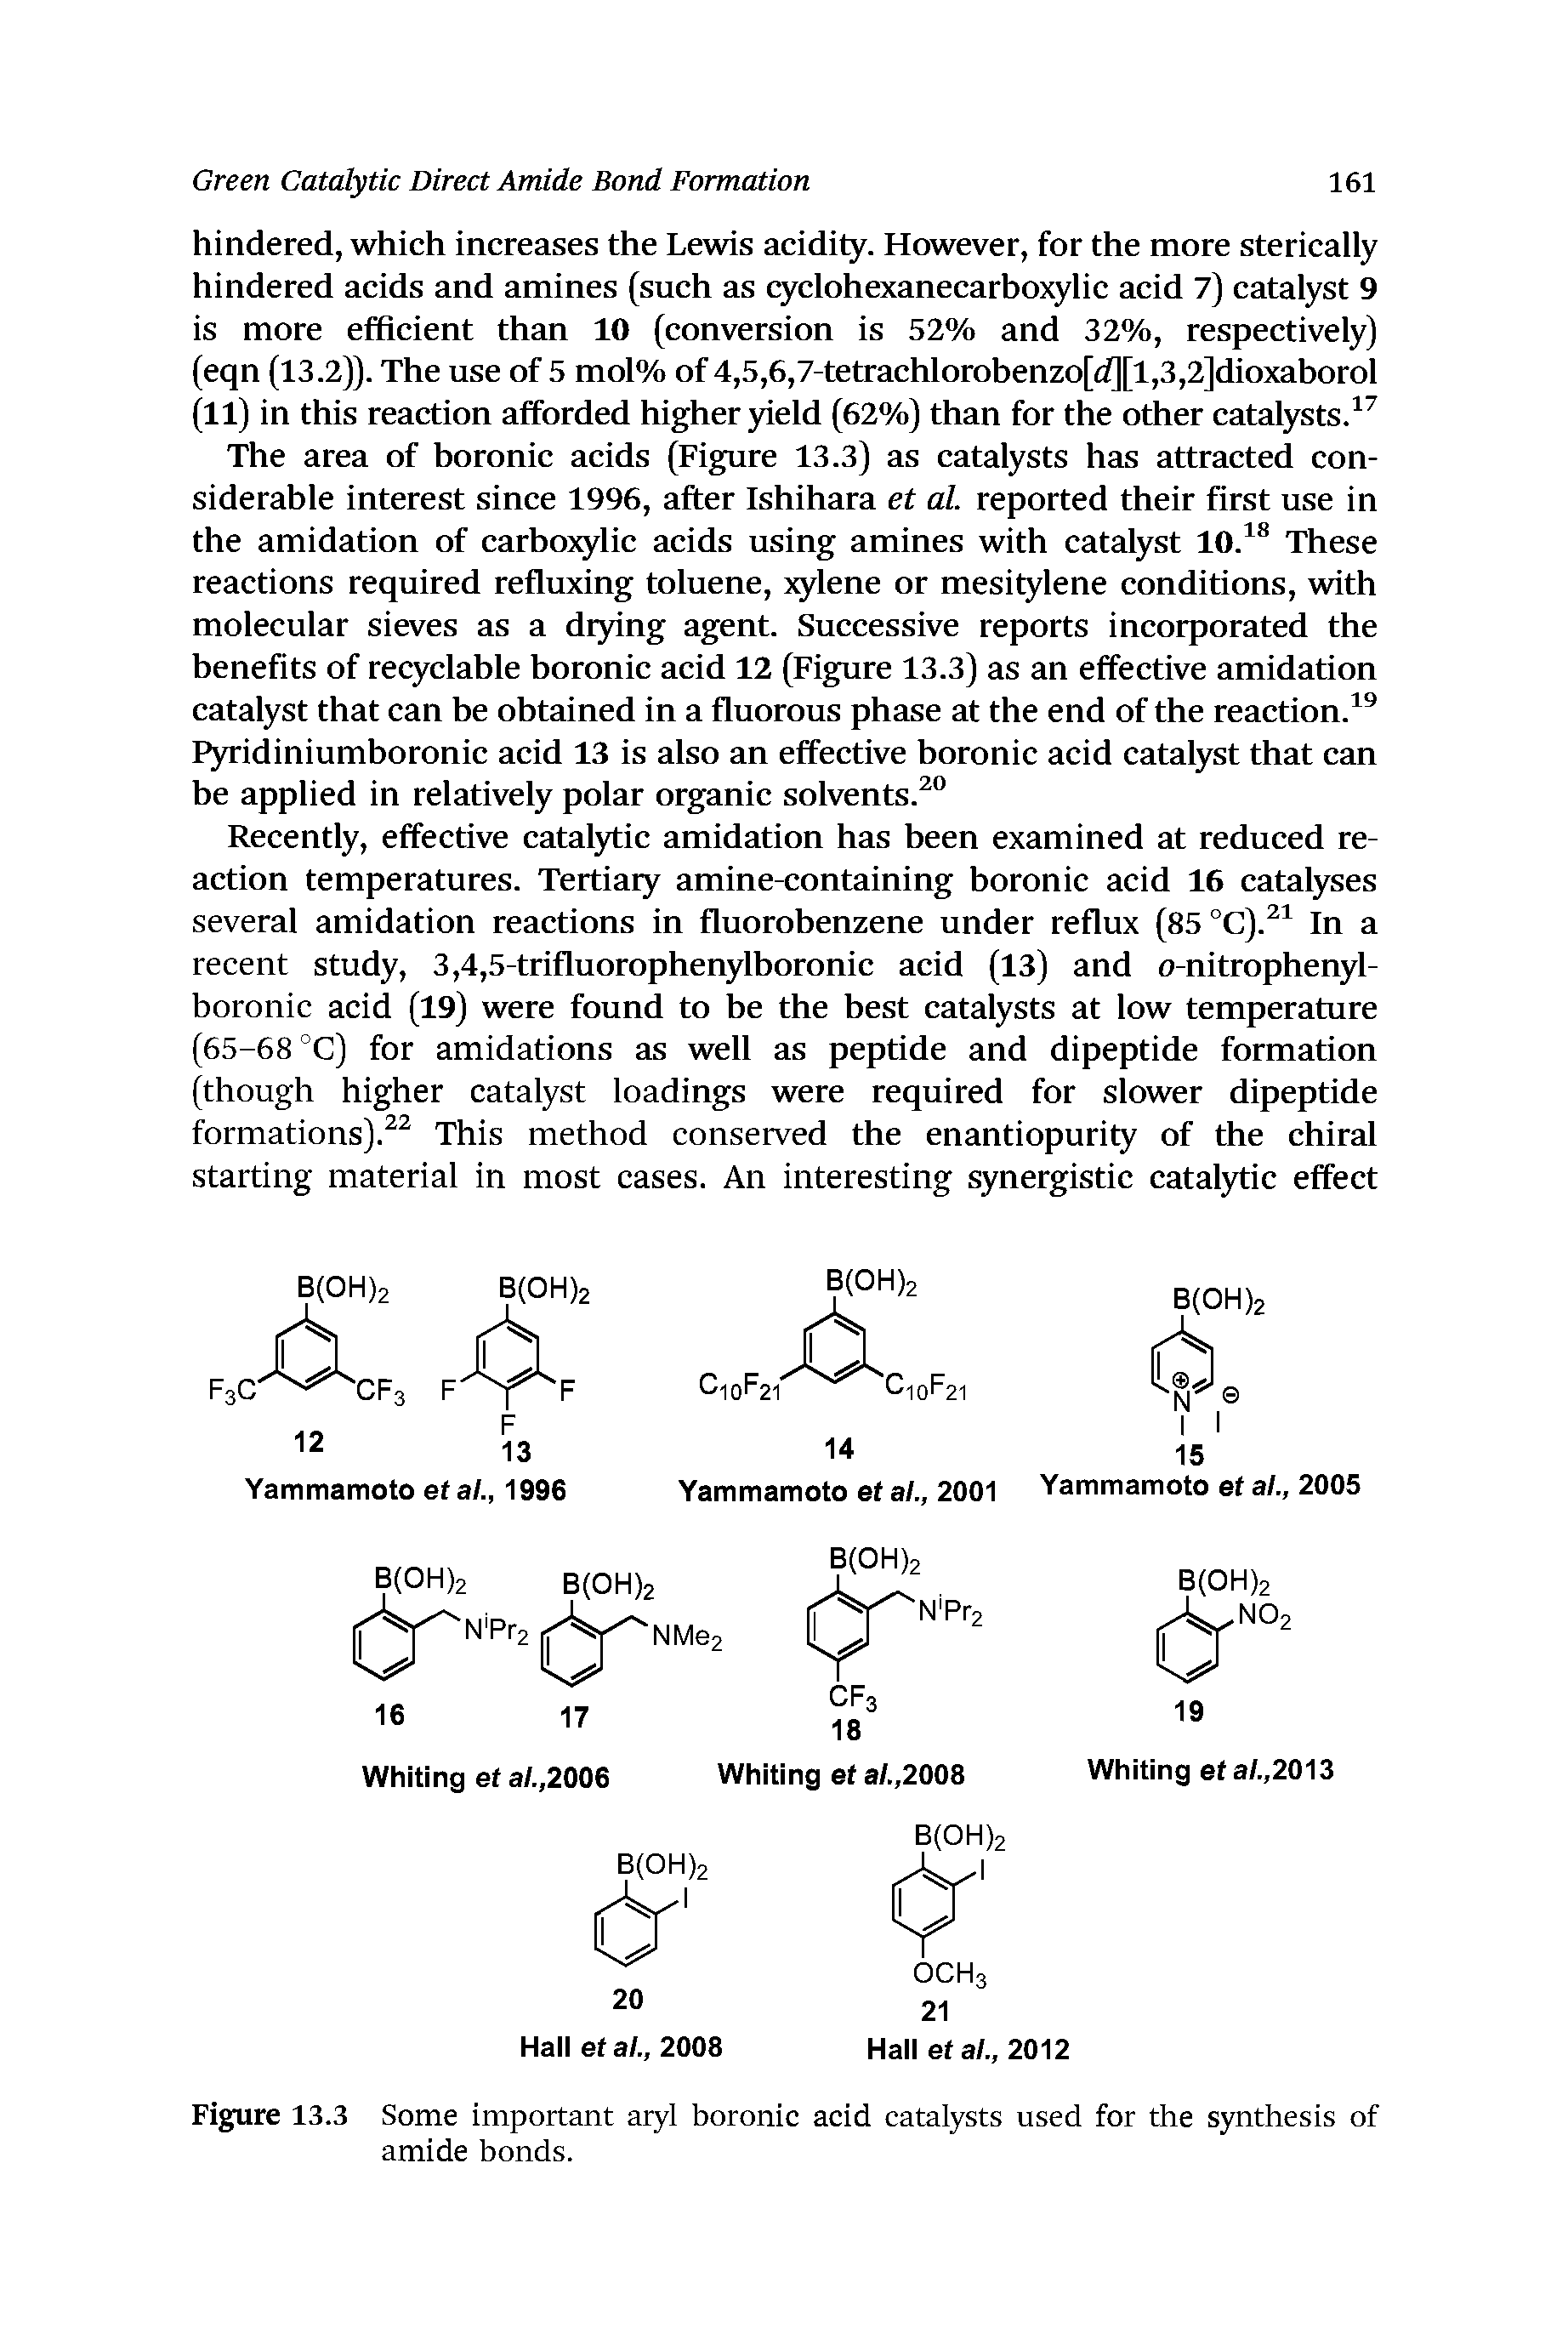 Figure 13.3 Some important aryl boronic acid catalysts used for the synthesis of amide bonds.